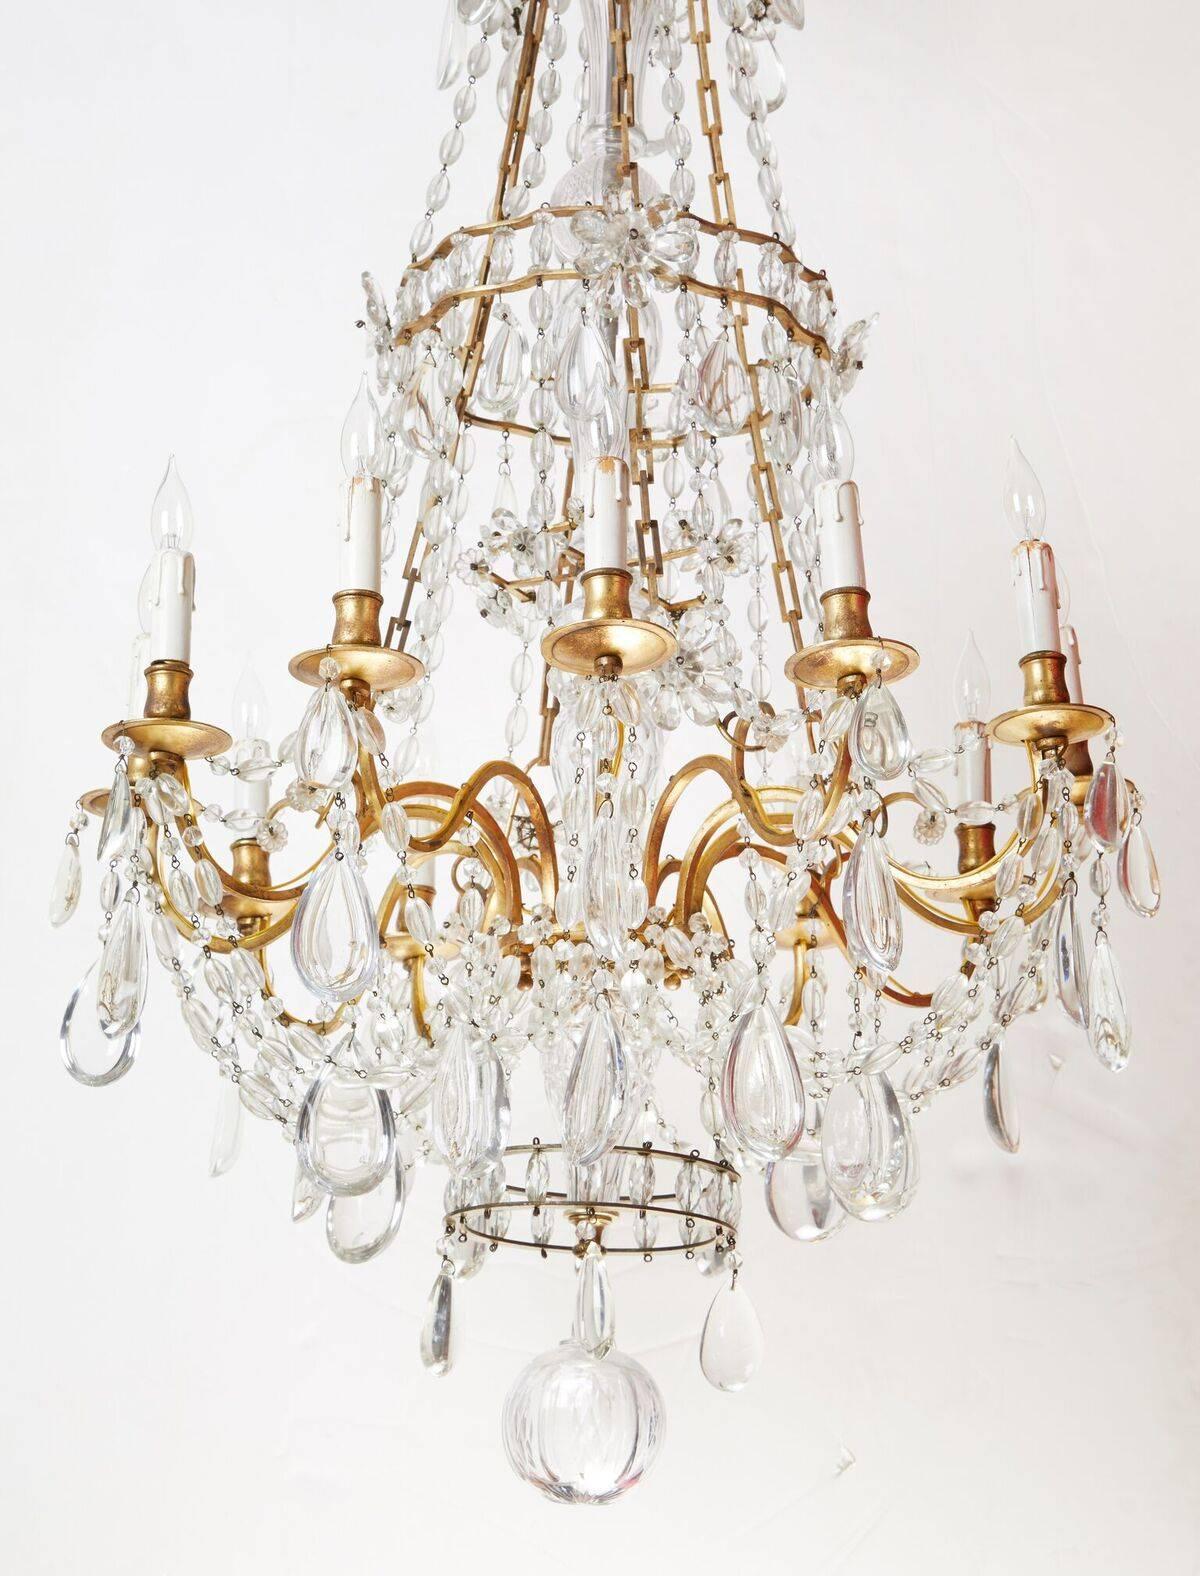 An elegant pair of mated, circa 1900, French, gilt bronze, twelve-arm chandelier with generous layers of crystal swags and large drops.